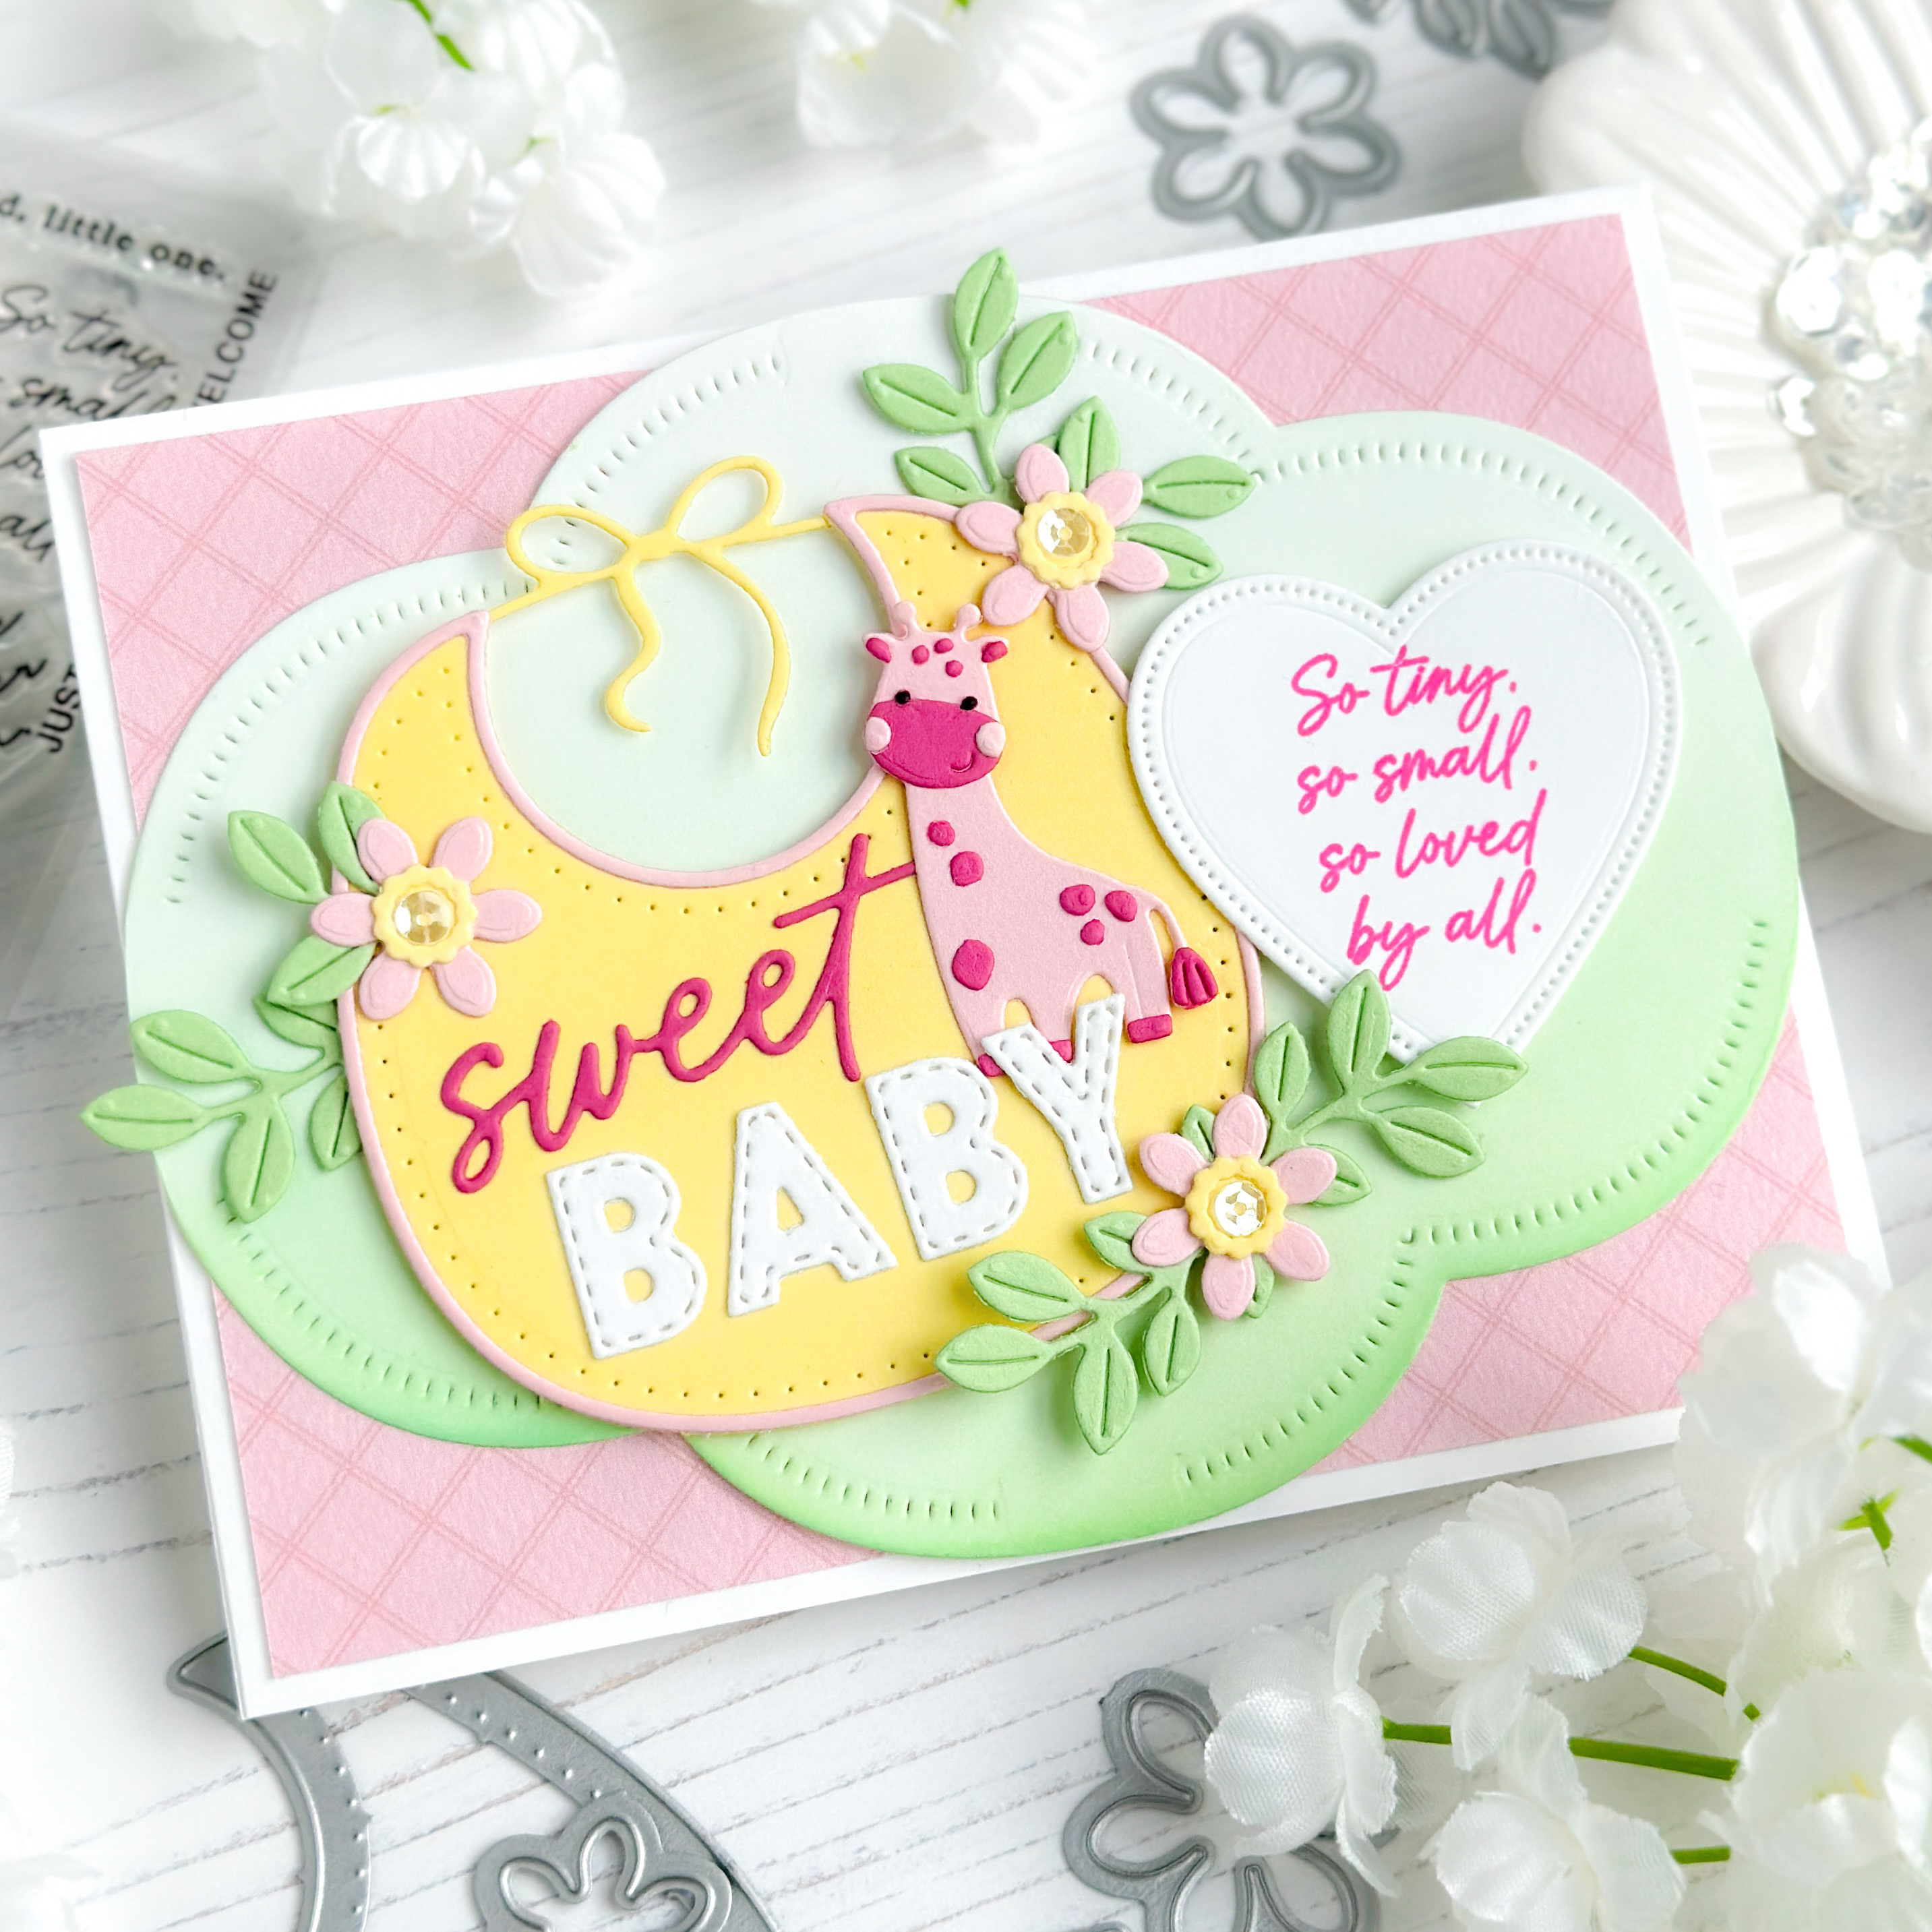 Just Sentiments: Welcome Mini Stamp Set